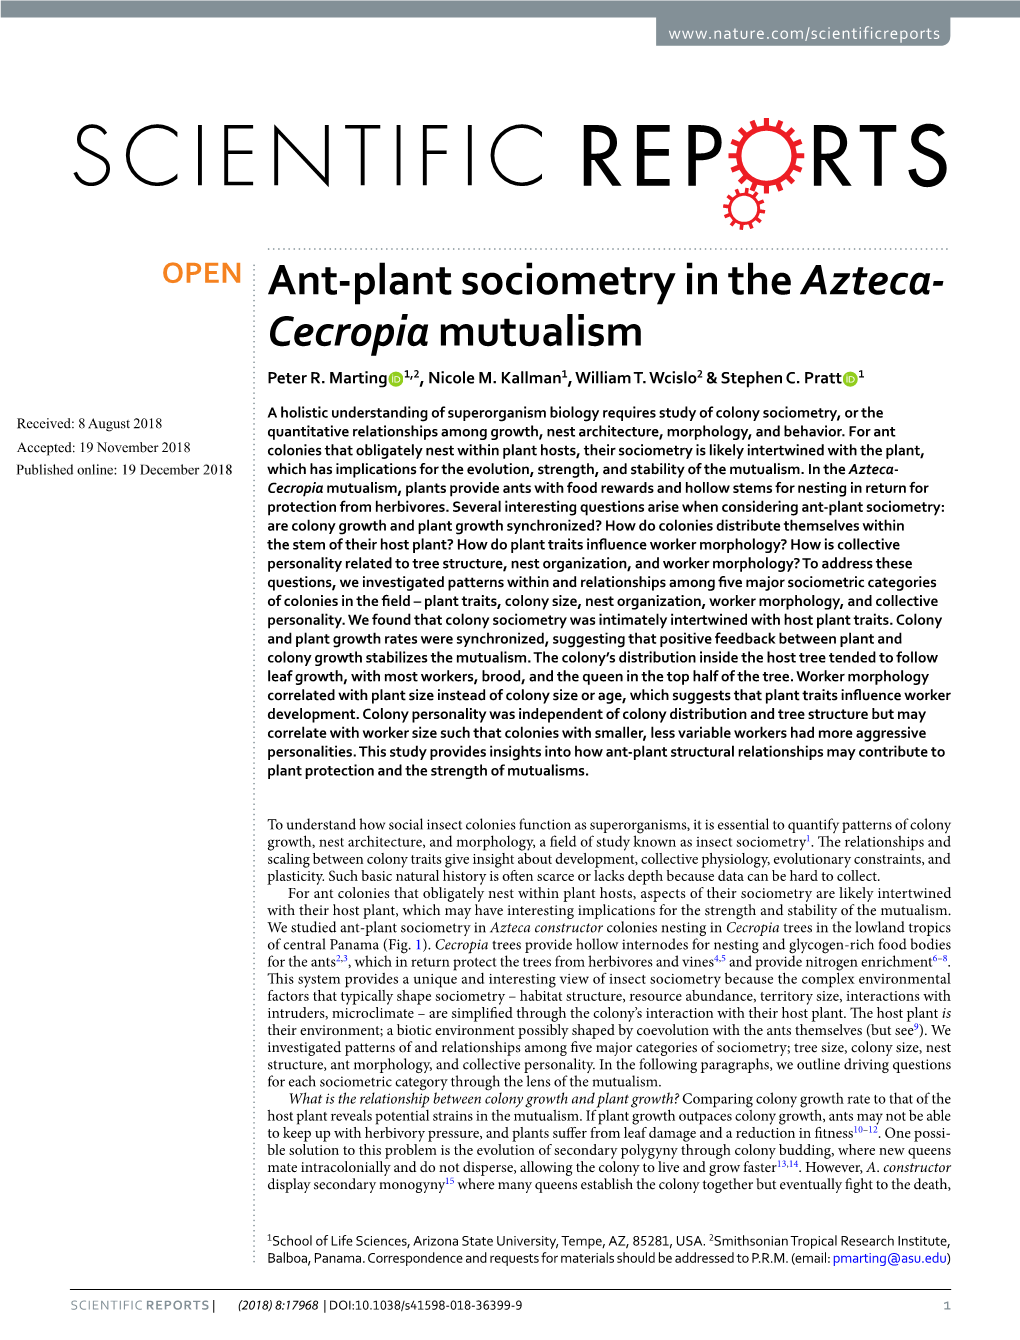 Ant-Plant Sociometry in the Azteca-Cecropia Mutualism